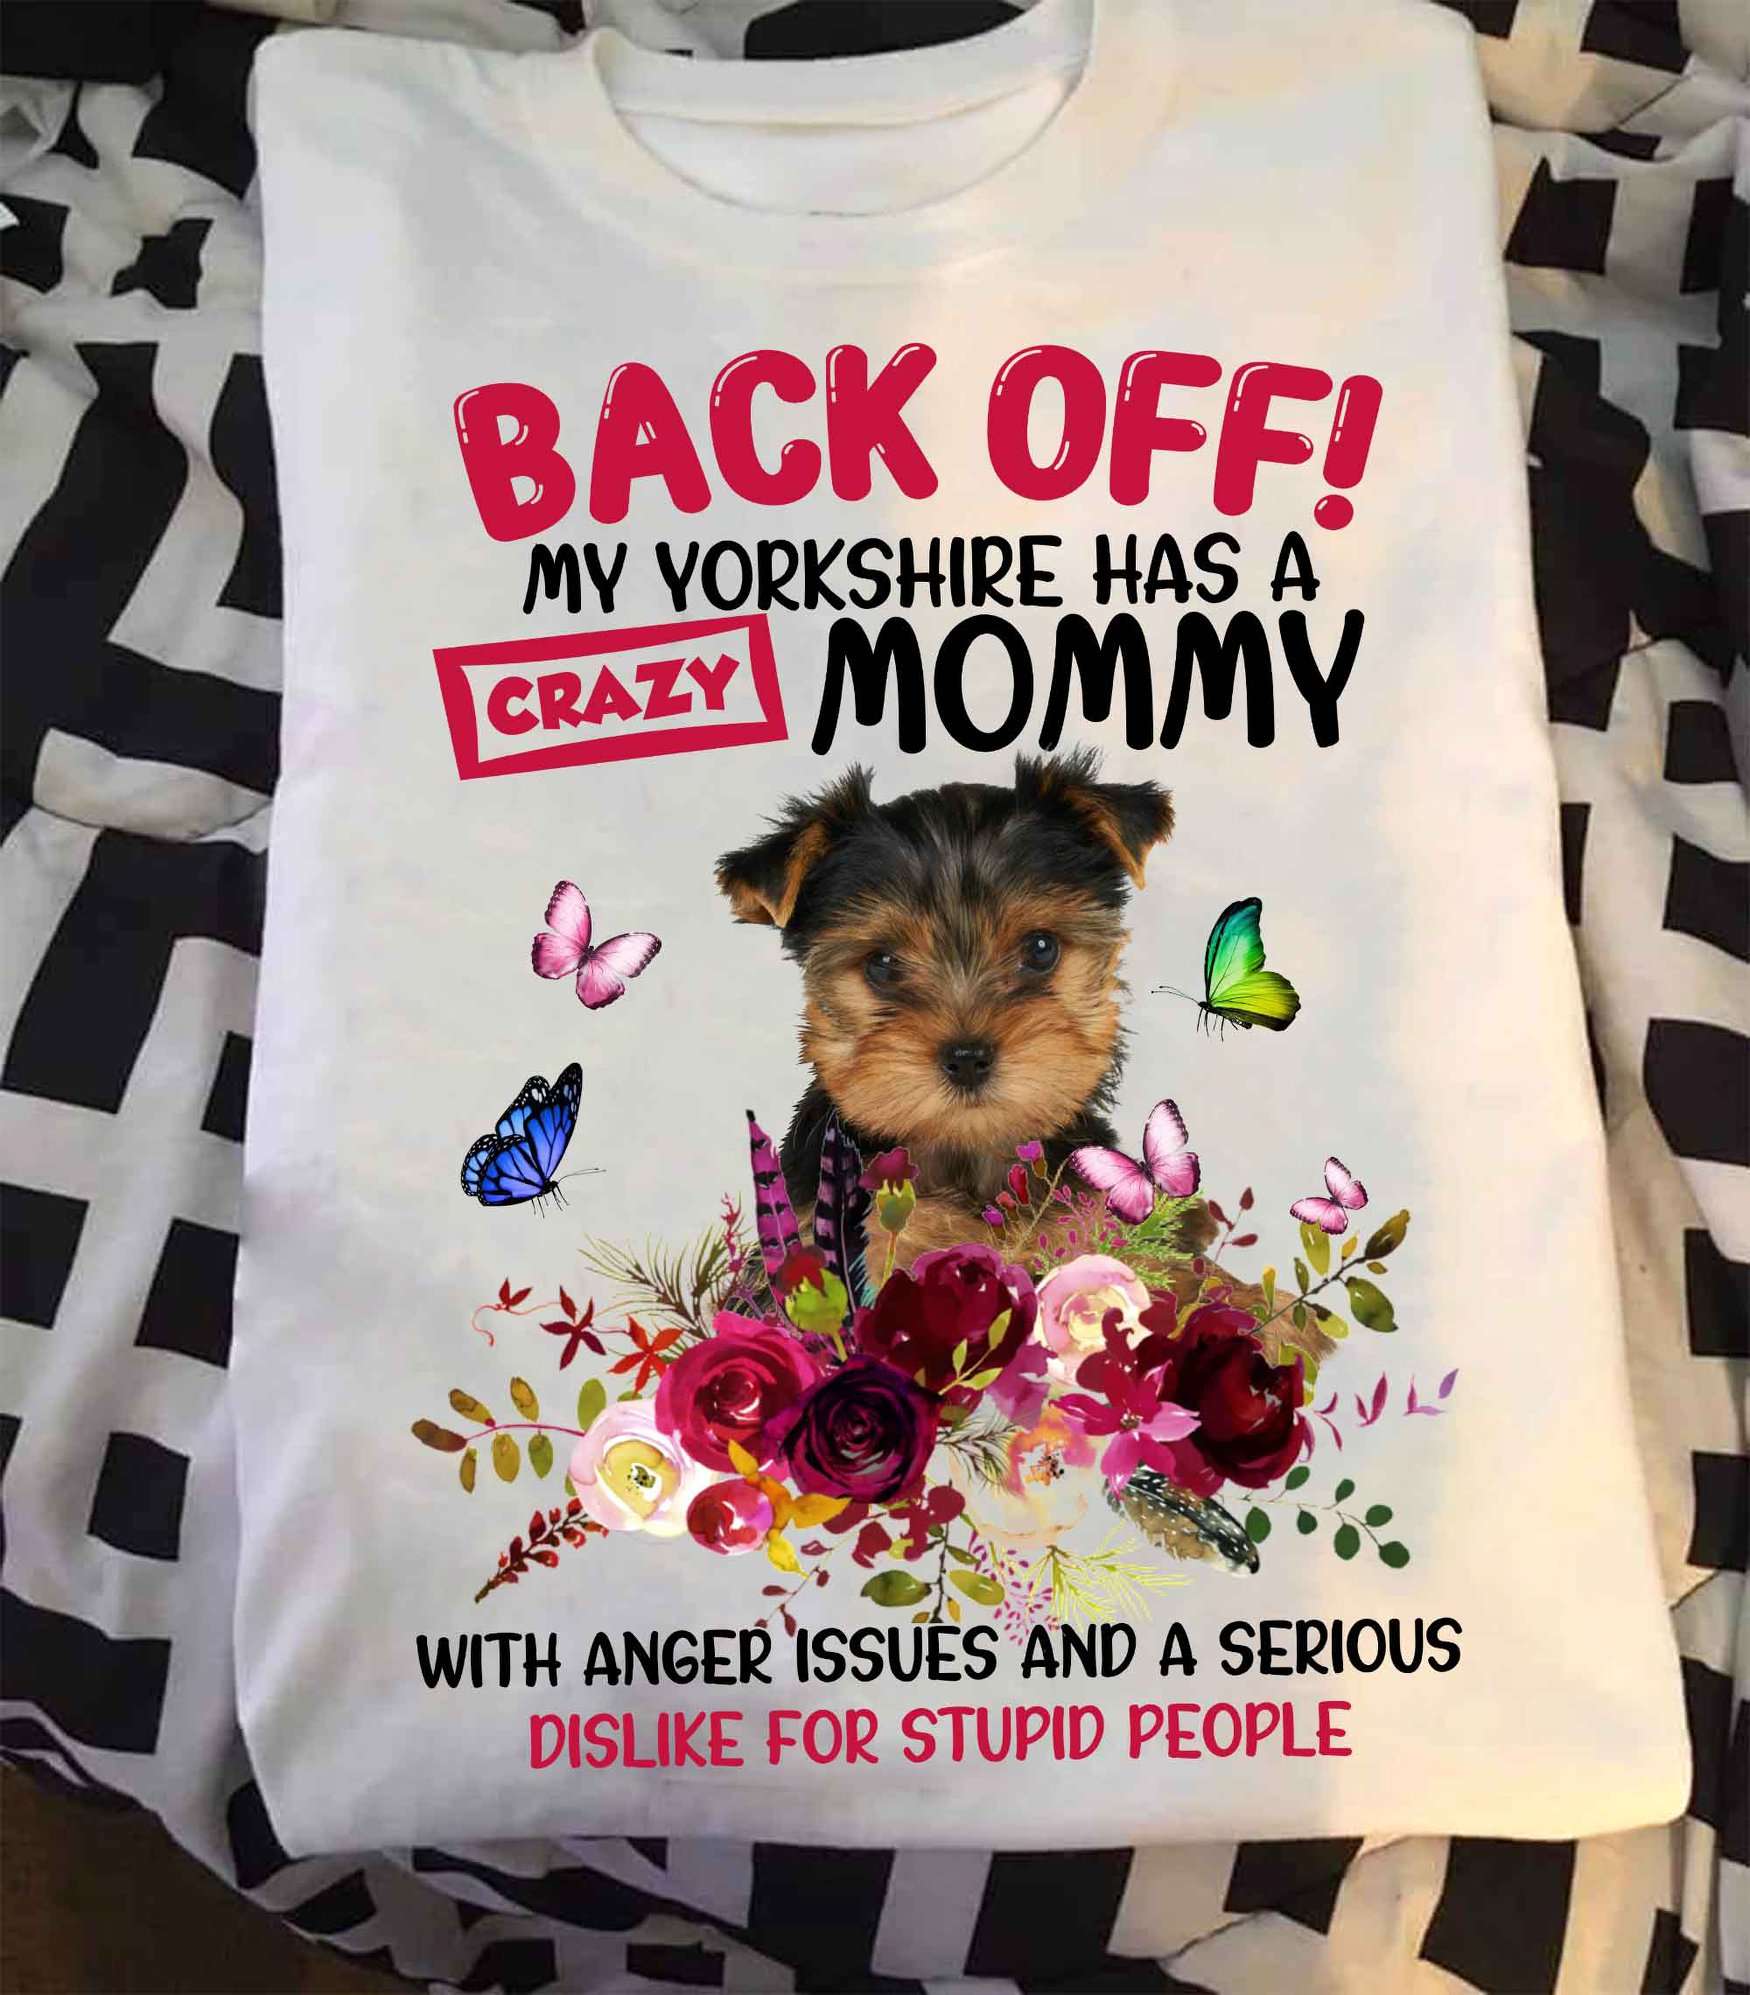 Back off! My yorkshire has a crazy mommy - Dog mom, Yorkshire puppy